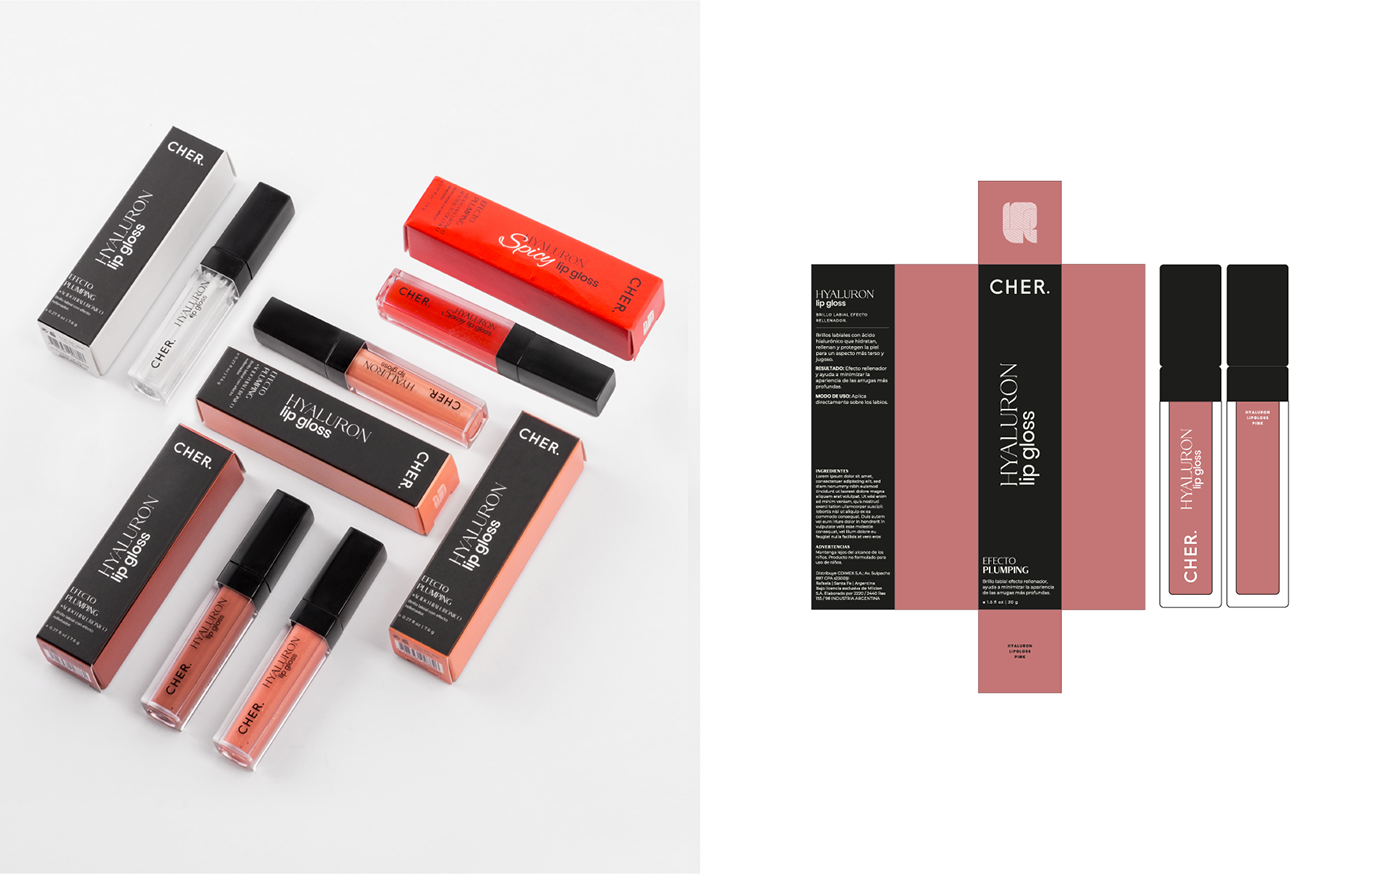 Packaging and label for lipgloss and dielines showing typographic layout